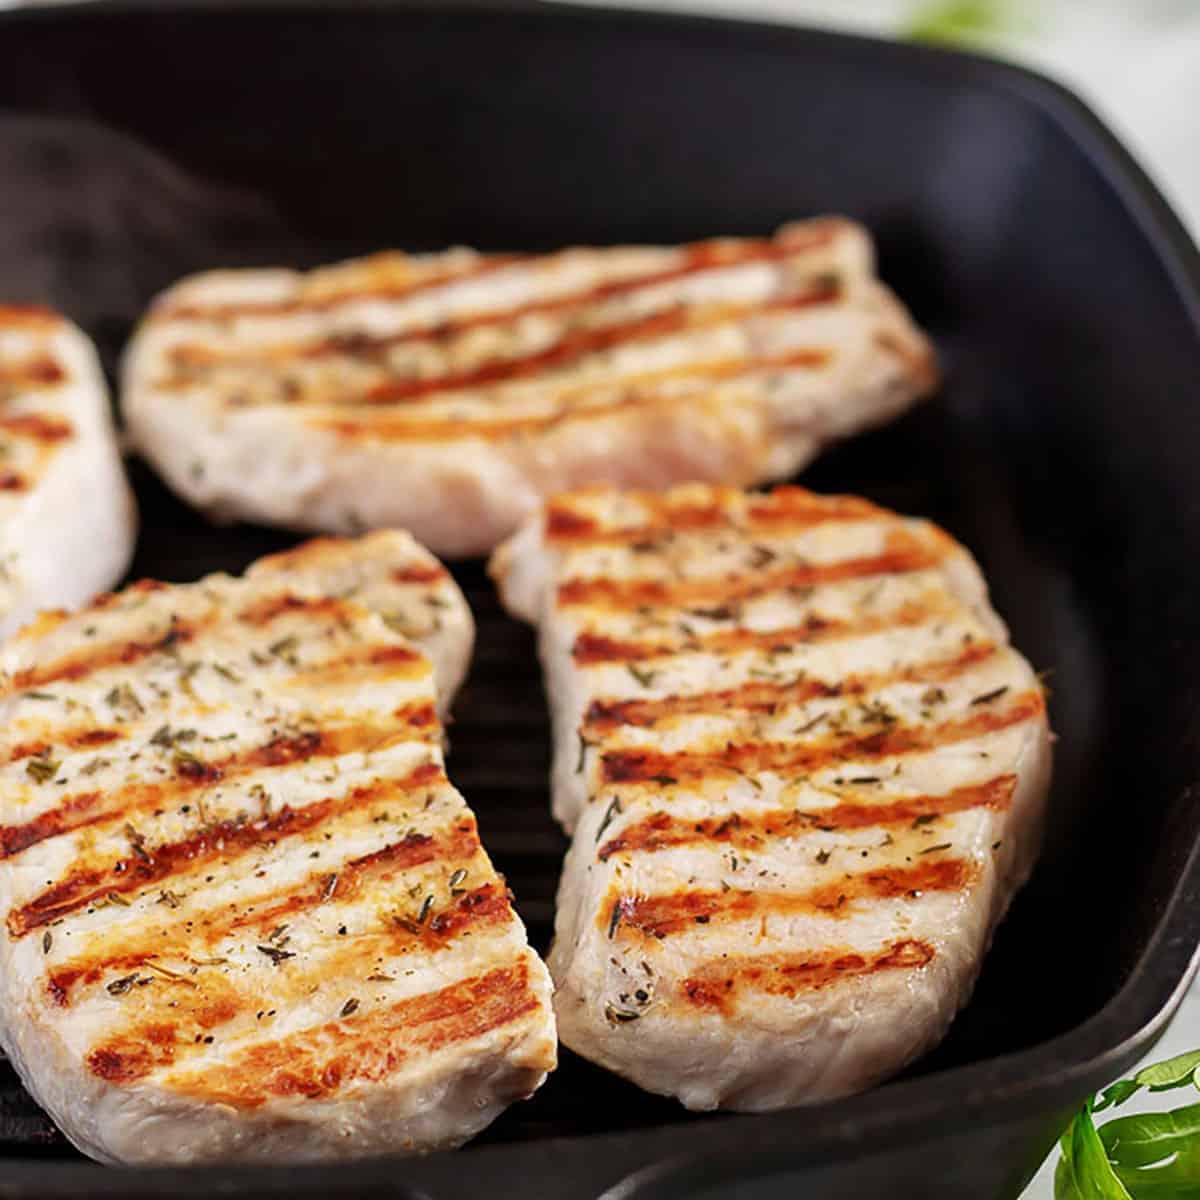 Four grilled pork chops in a cast iron skillet.